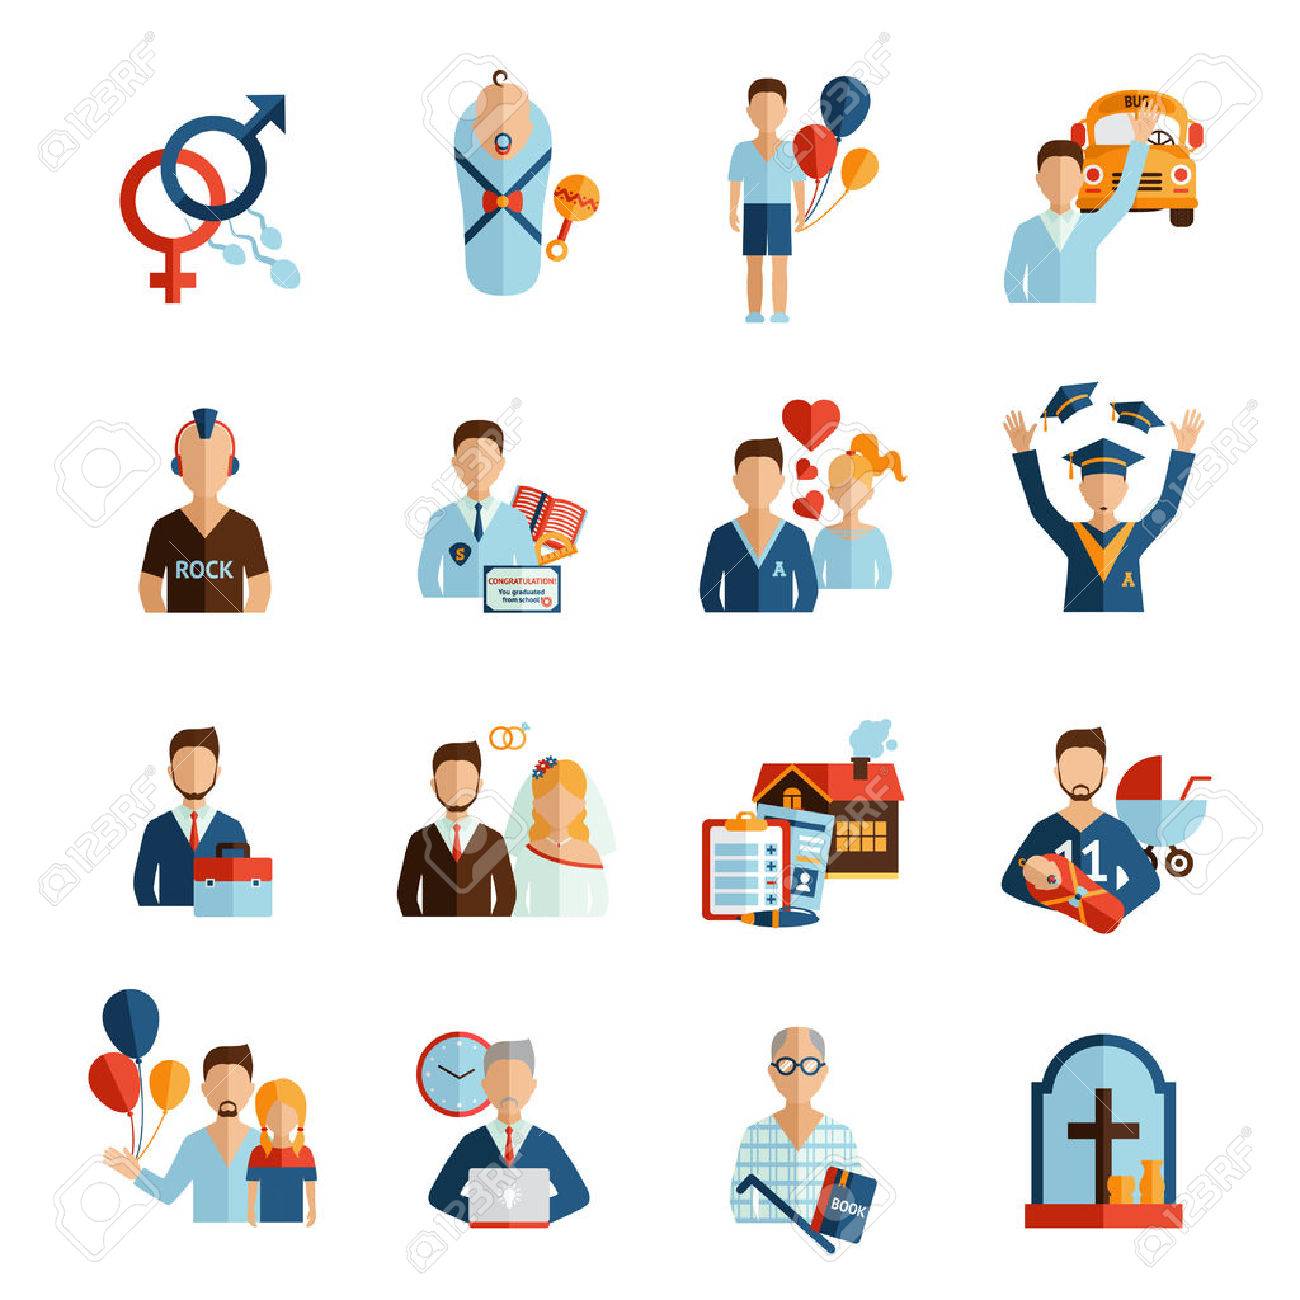 40283865-person-life-stages-and-growing-process-icons-set-isolated-vector-illustration.jpg